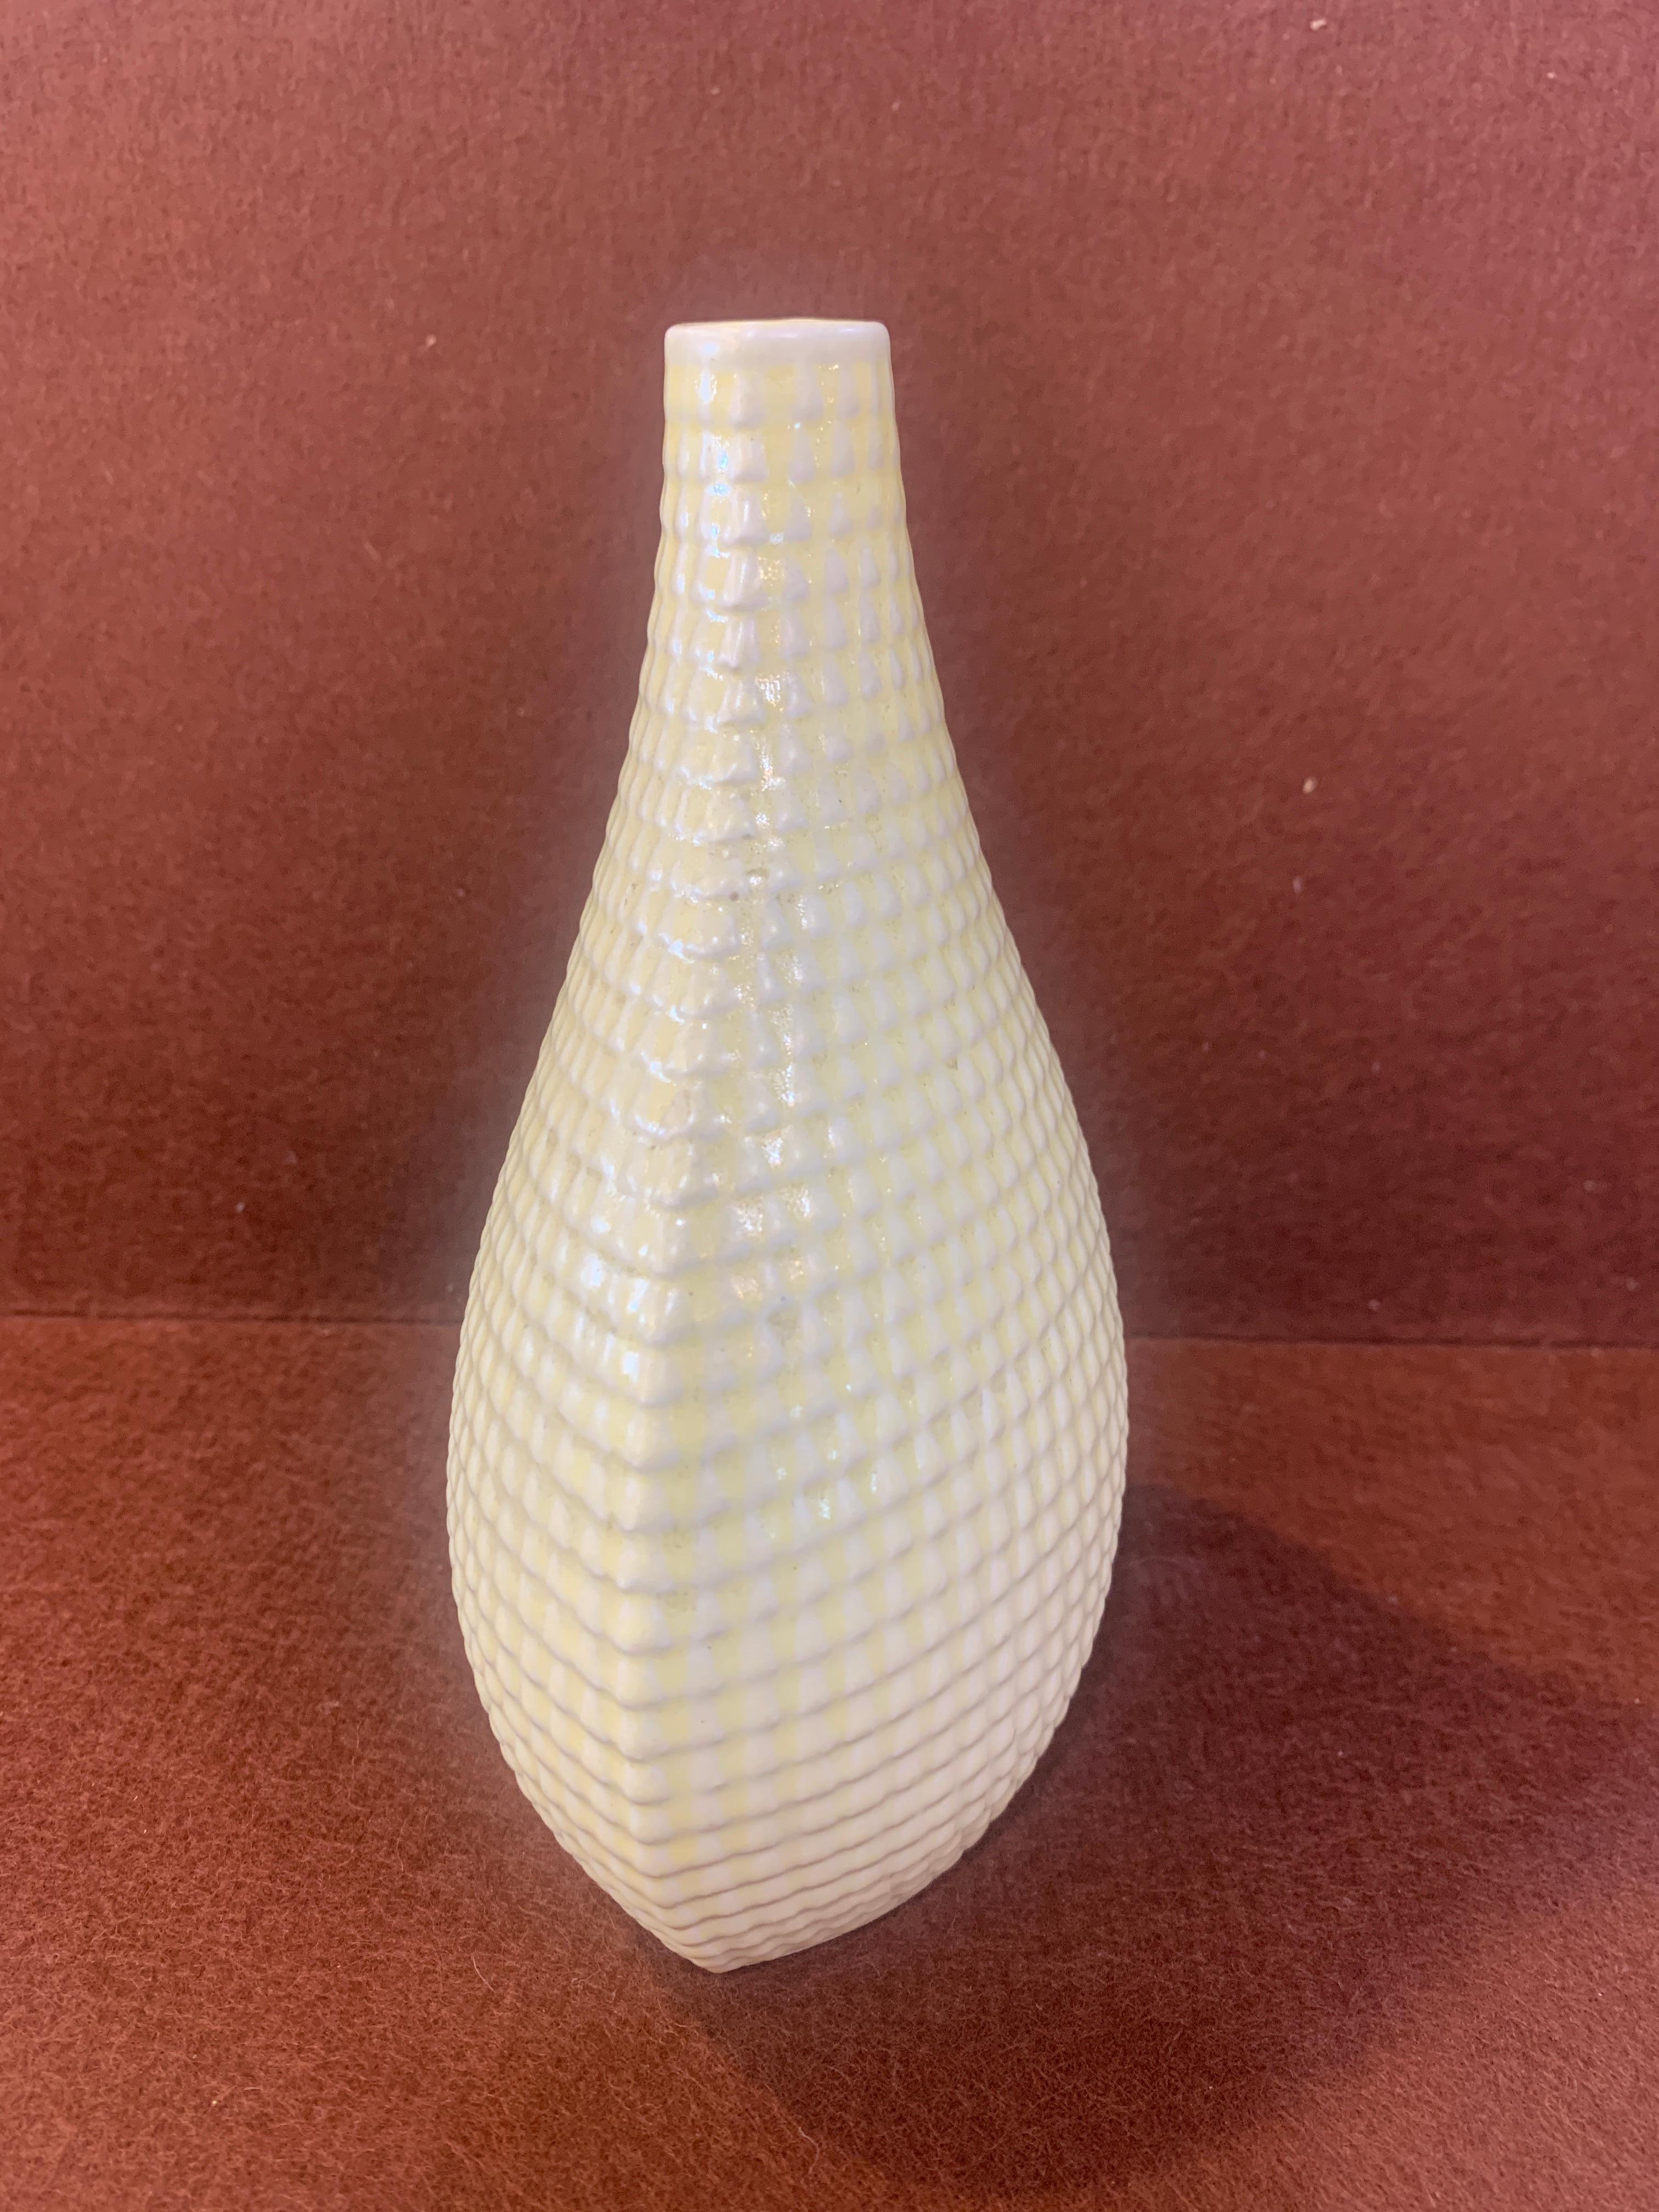 Lemon yellow colored vase of Gustavsberg company production, Reptil series model, by Designer Stig Lindberg.
Swedish origin.
Produced from 1953 to 1963, this one is from 1957.